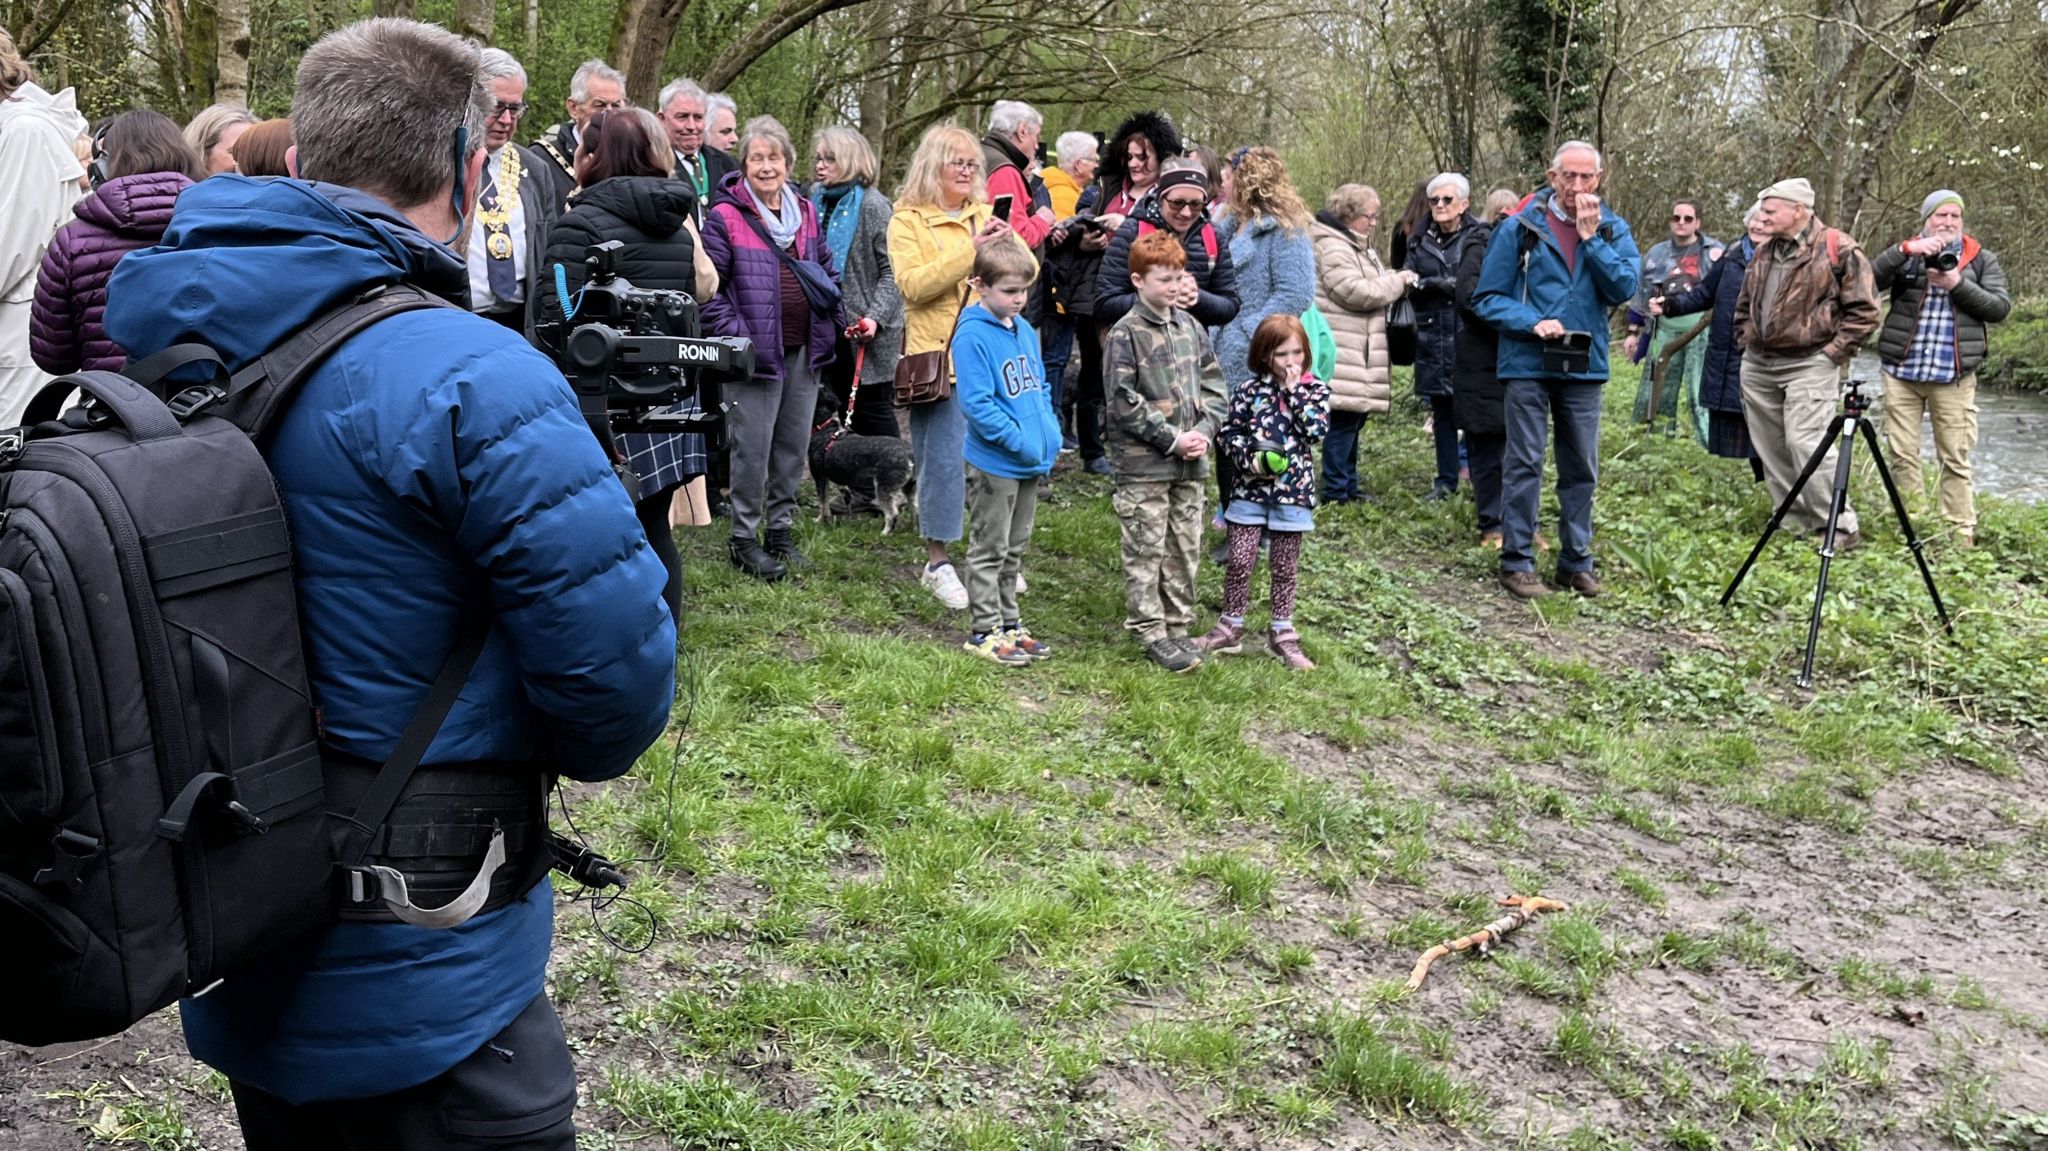 Local people standing on the bank of the river Marden watching the blessing ceremony